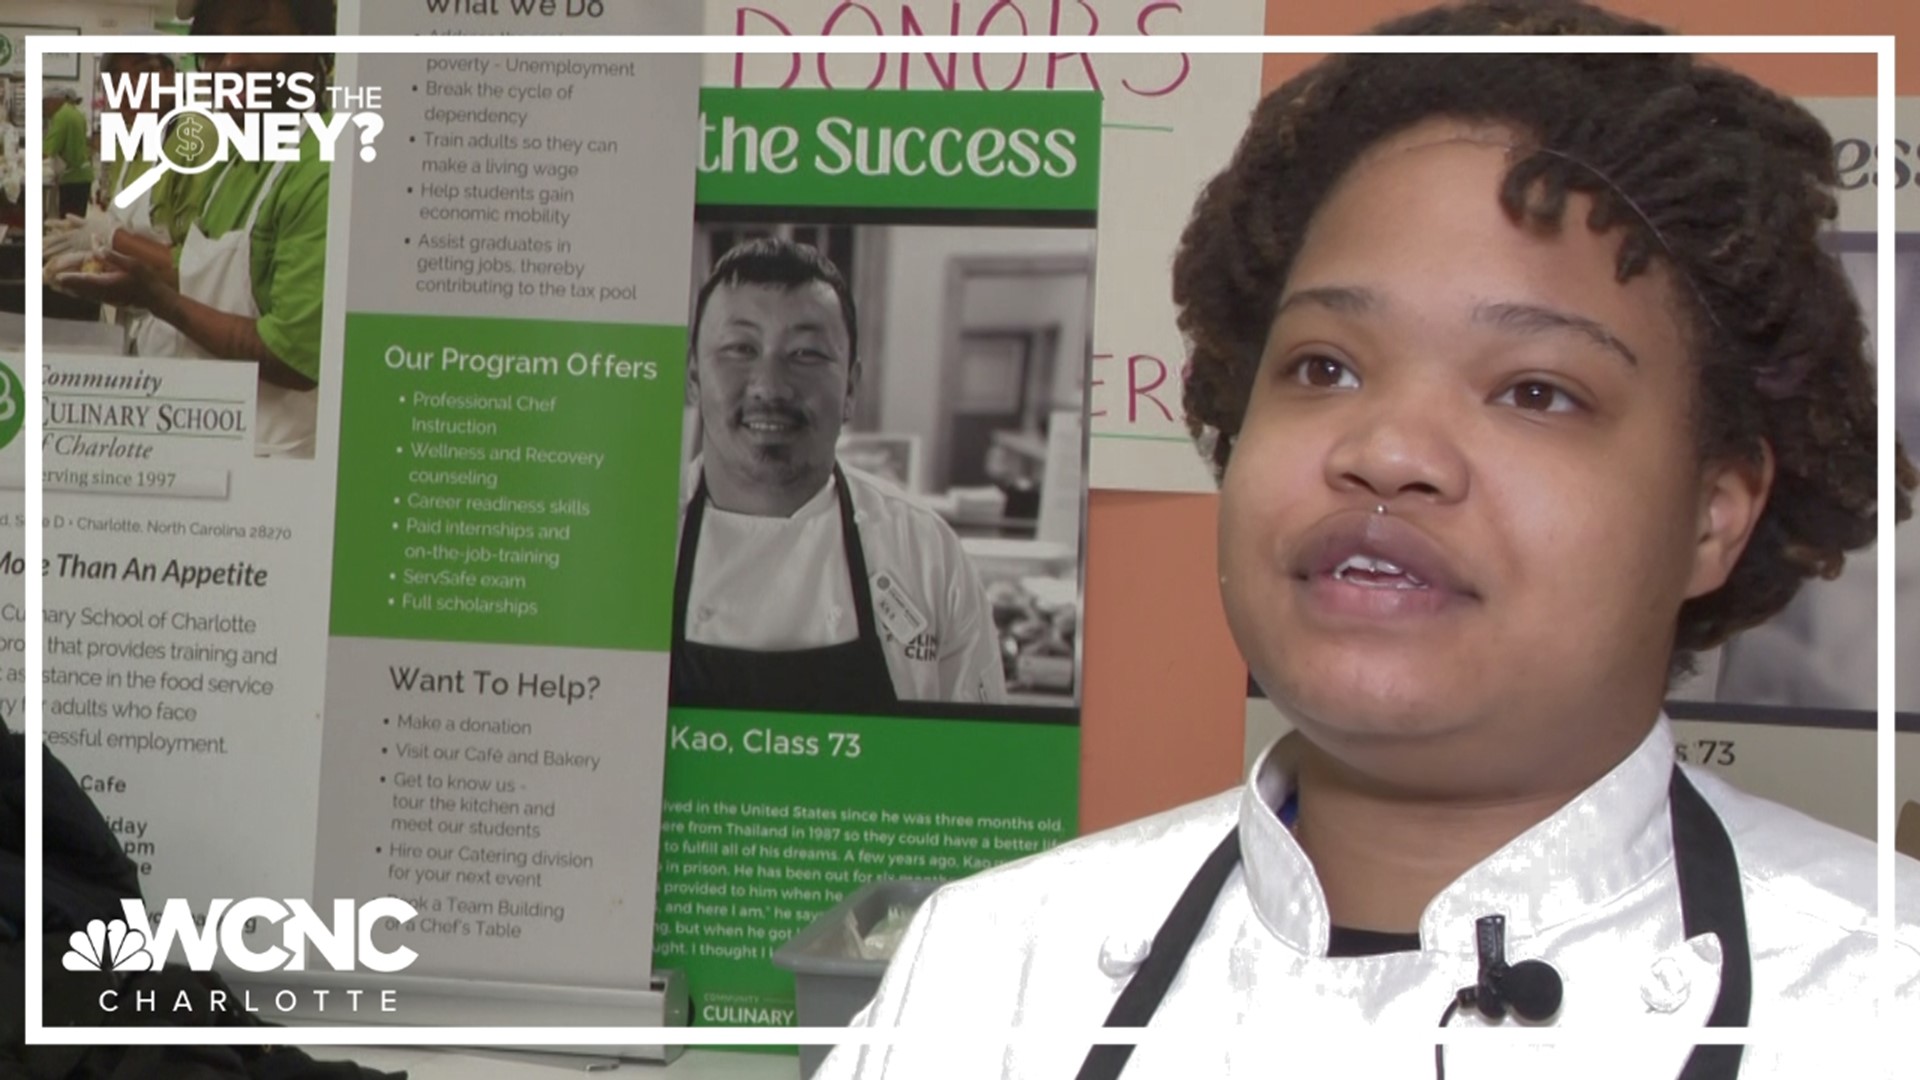 The Community Culinary School of Charlotte assists adults who have faced barriers to long-term employment get ahead in a professional kitchen.